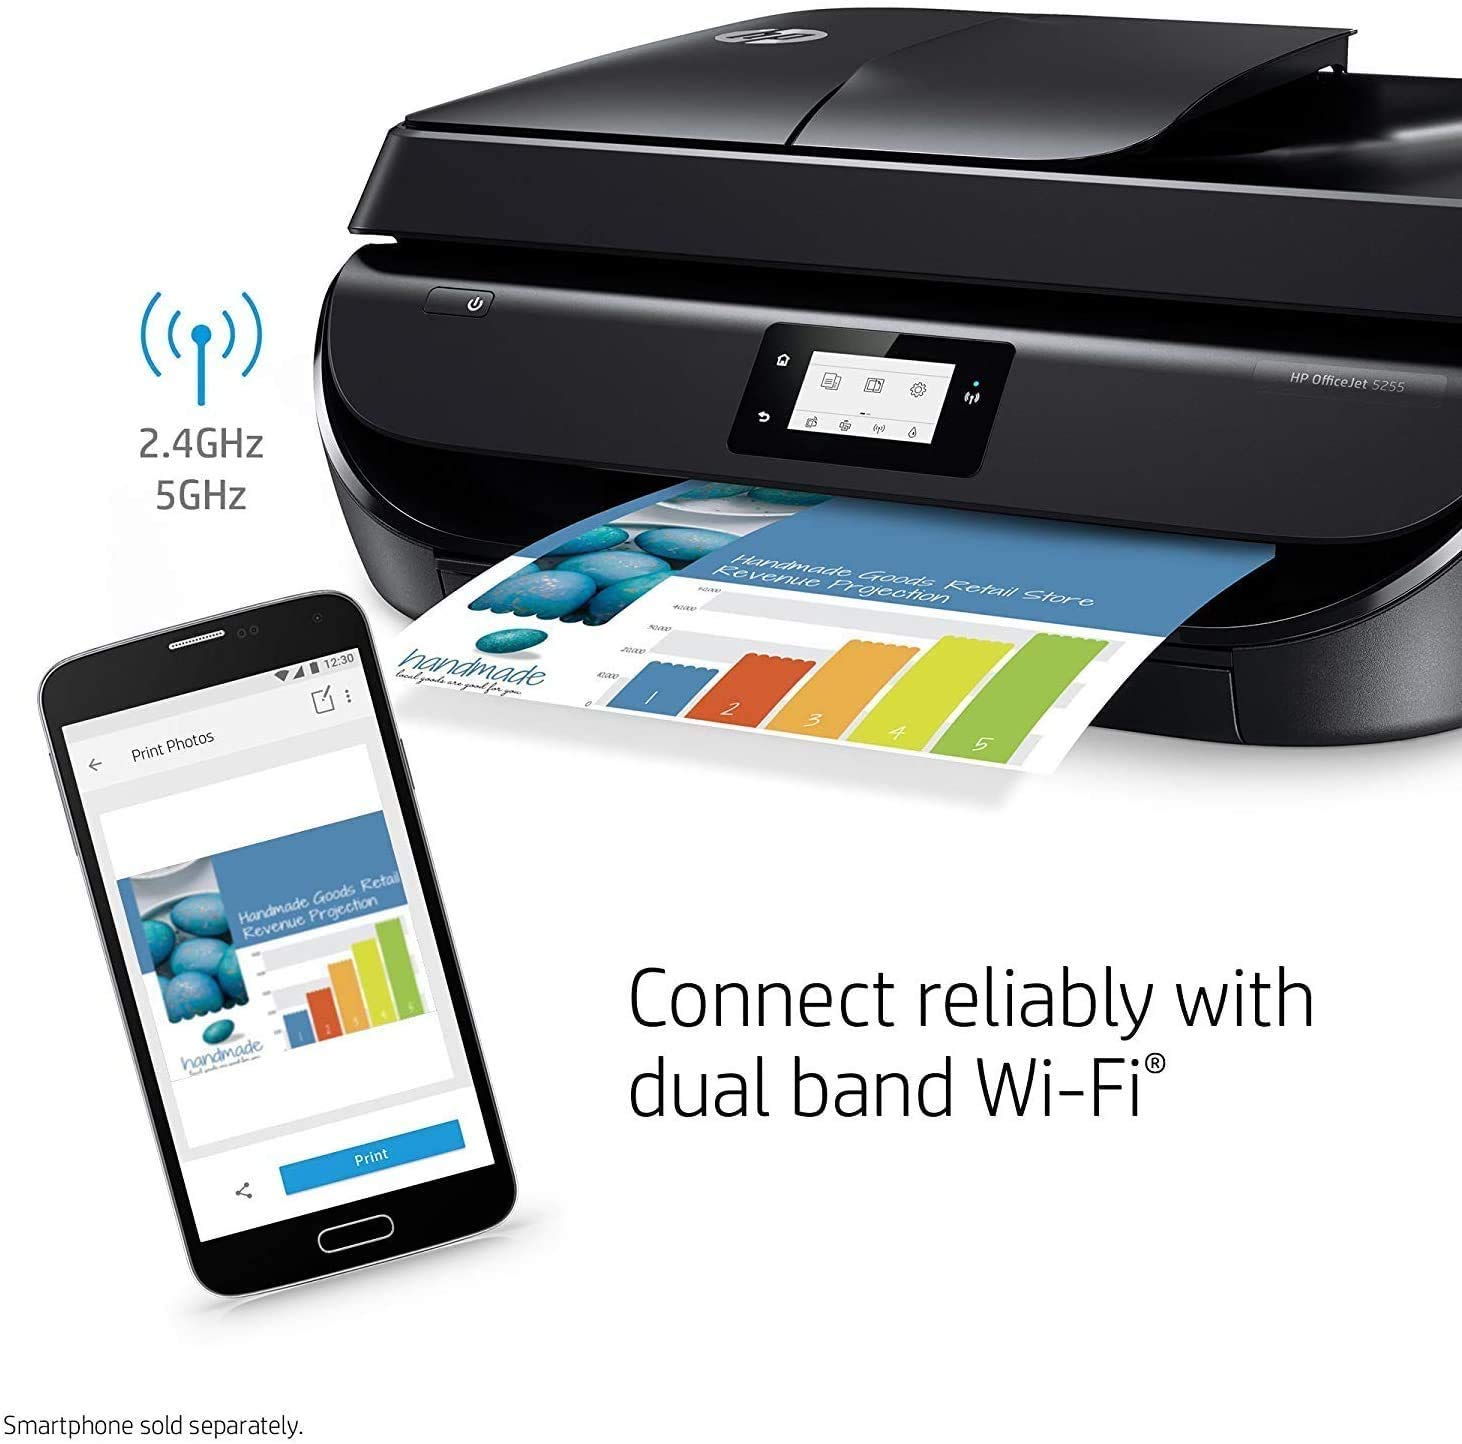 HP OfficeJet 5255 Wireless All-in-One Color Printer, HP Instant Ink, Works with Alexa (M2U75A)